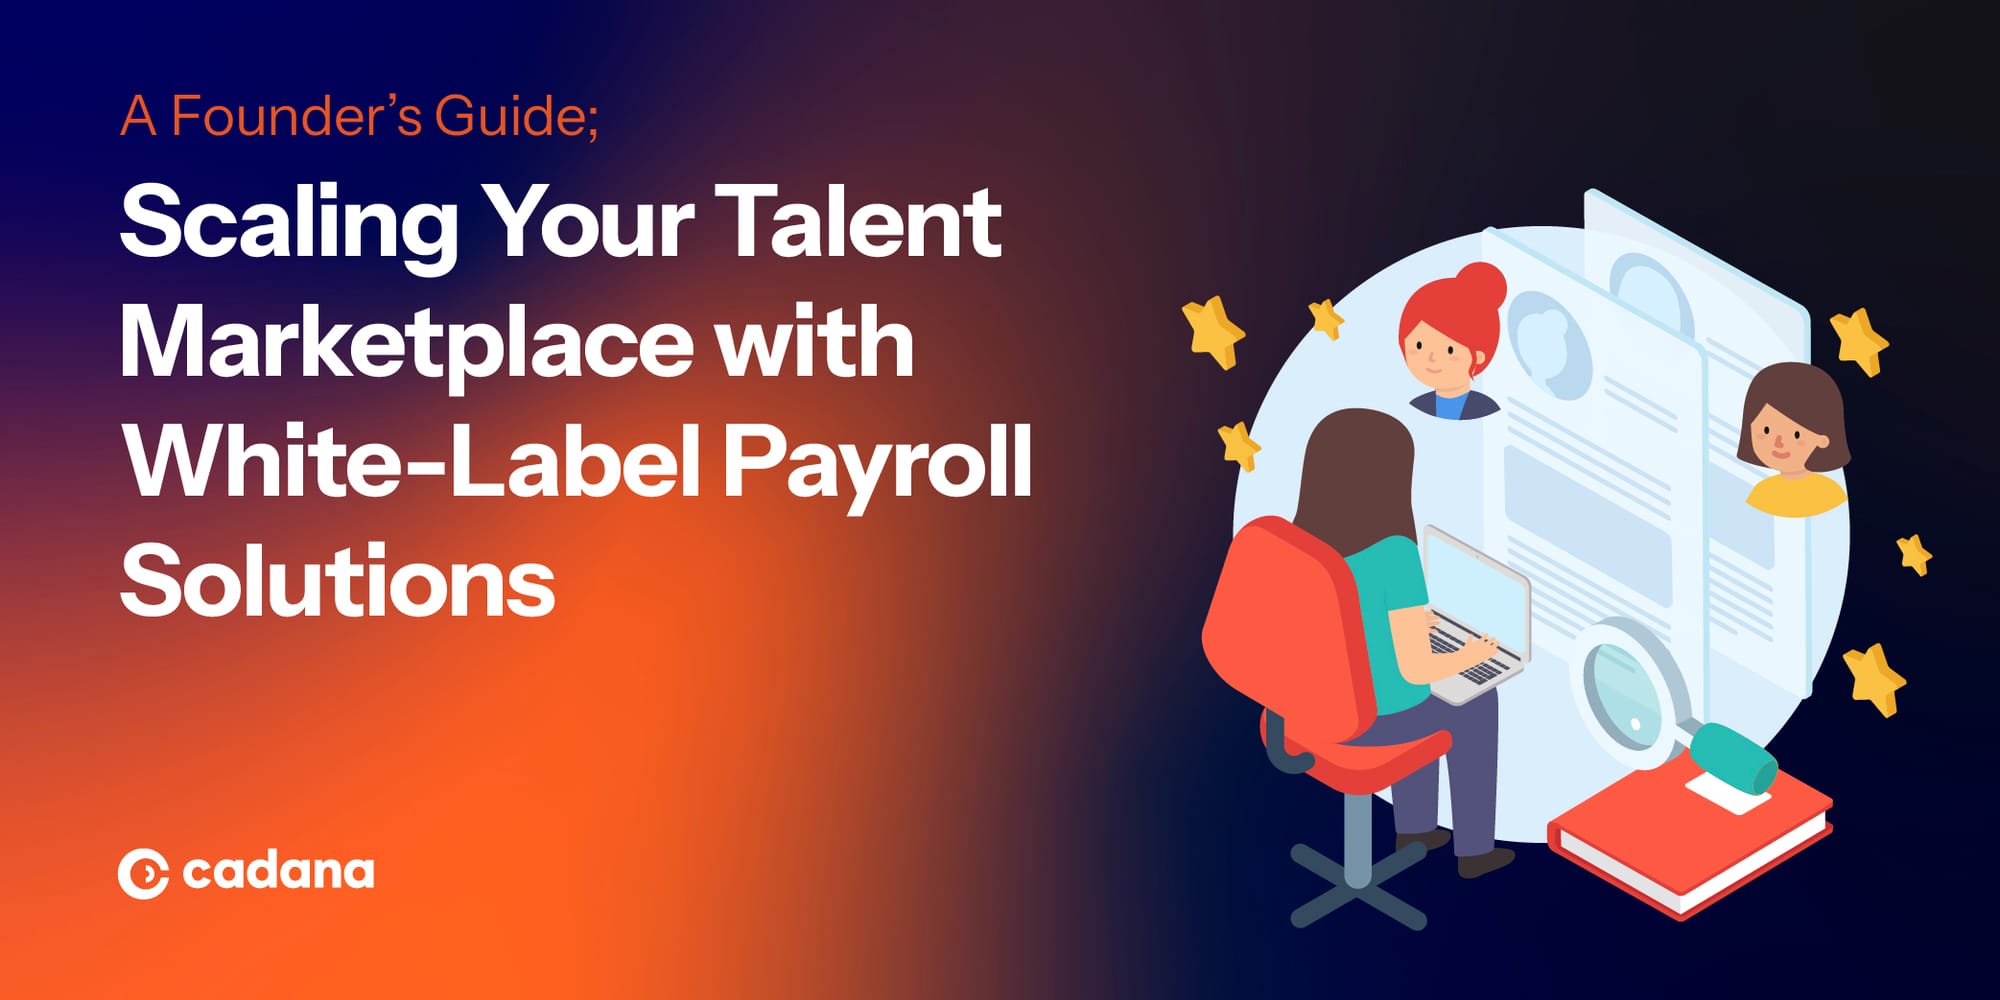 Scaling Your Talent Marketplace with White-Label Payroll Solutions